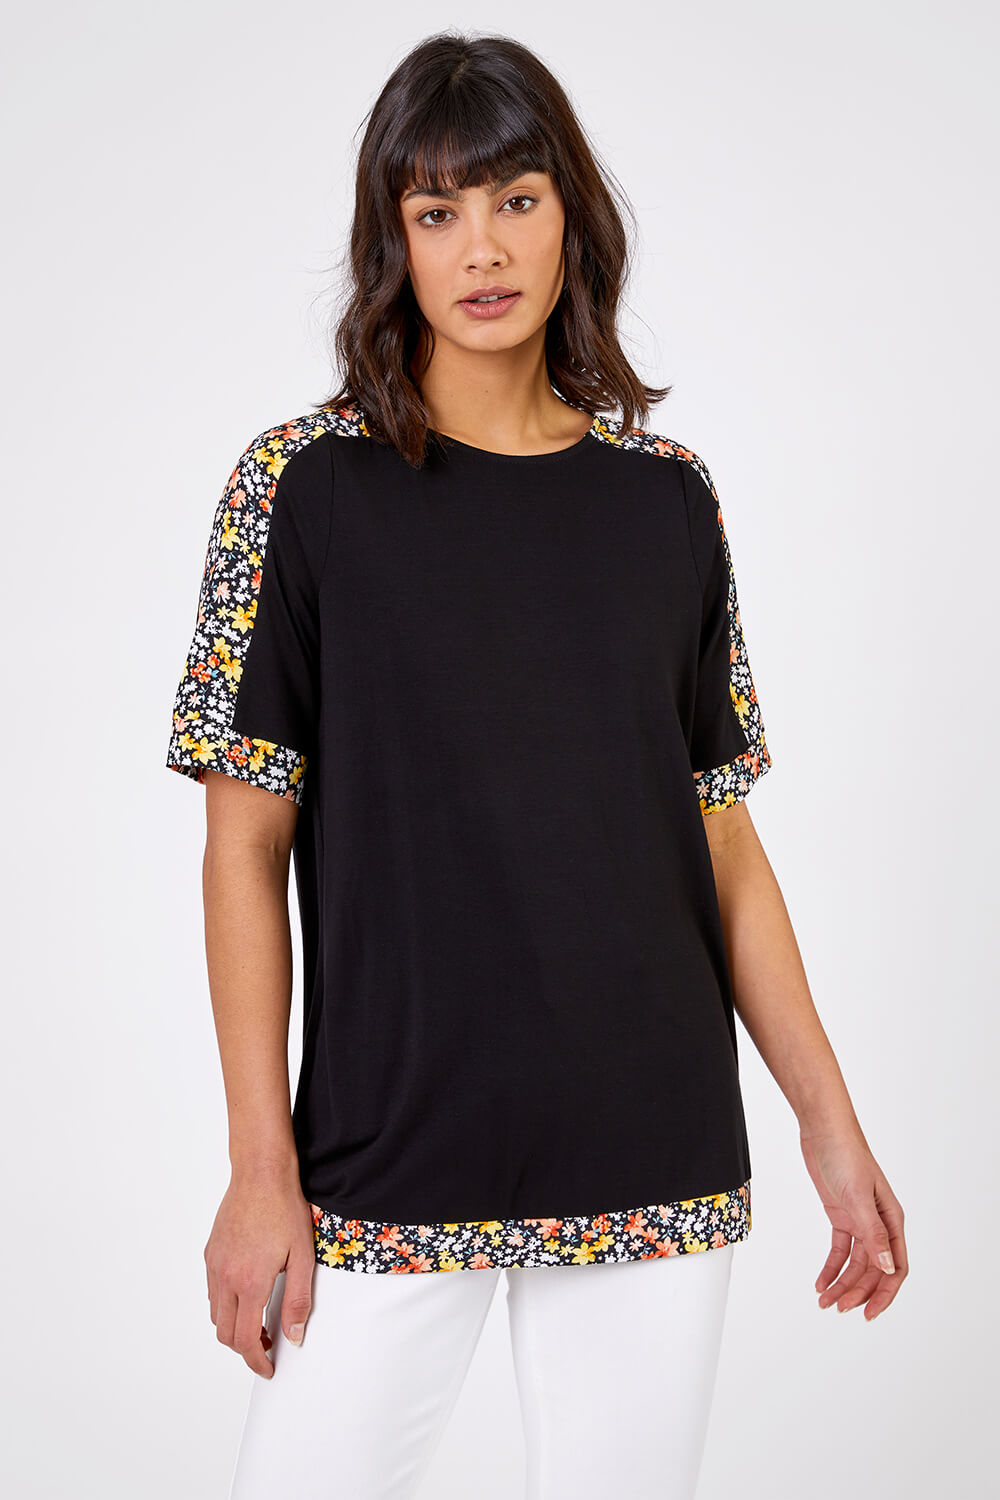 Floral Print Contrast Jeresey Top